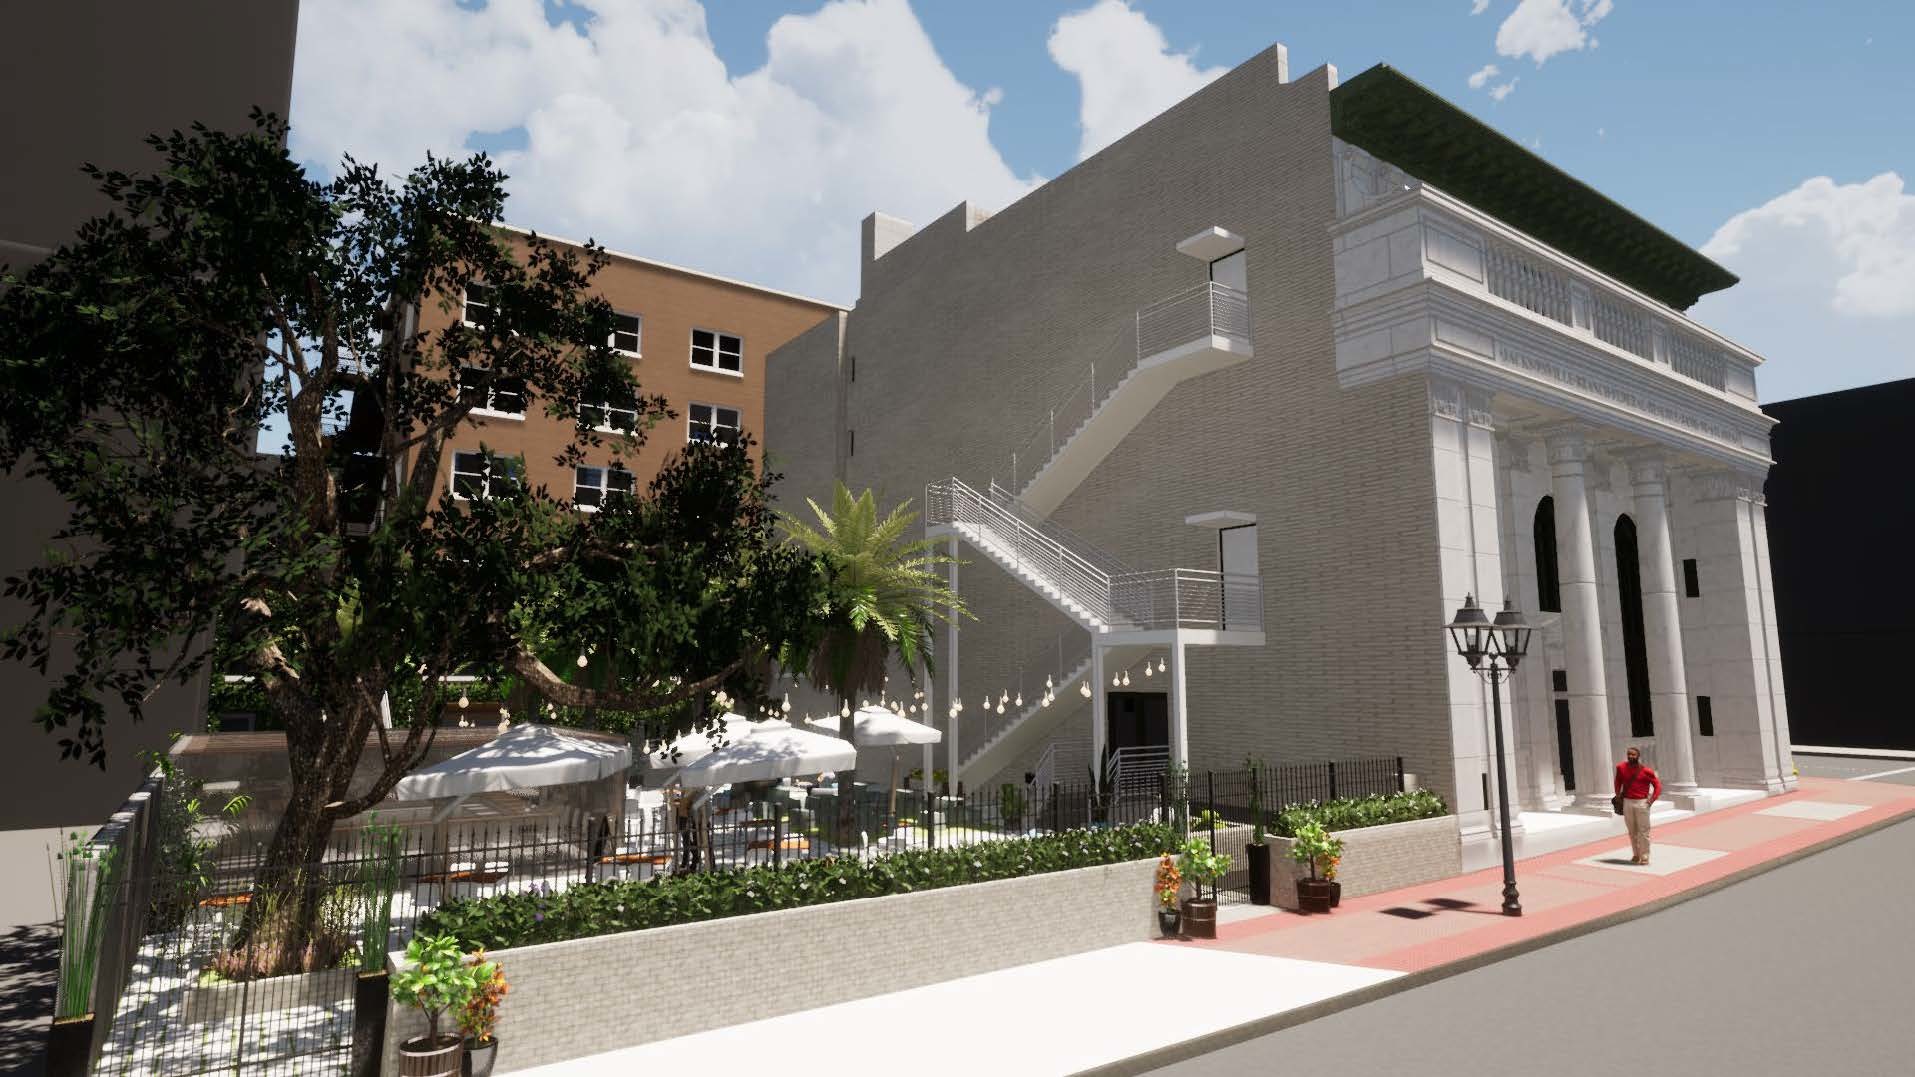 Plans for the Federal Reserve Bank Building at 424 N. Hogan St. include a restaurant, business and banquet space and an exterior courtyard for dining.